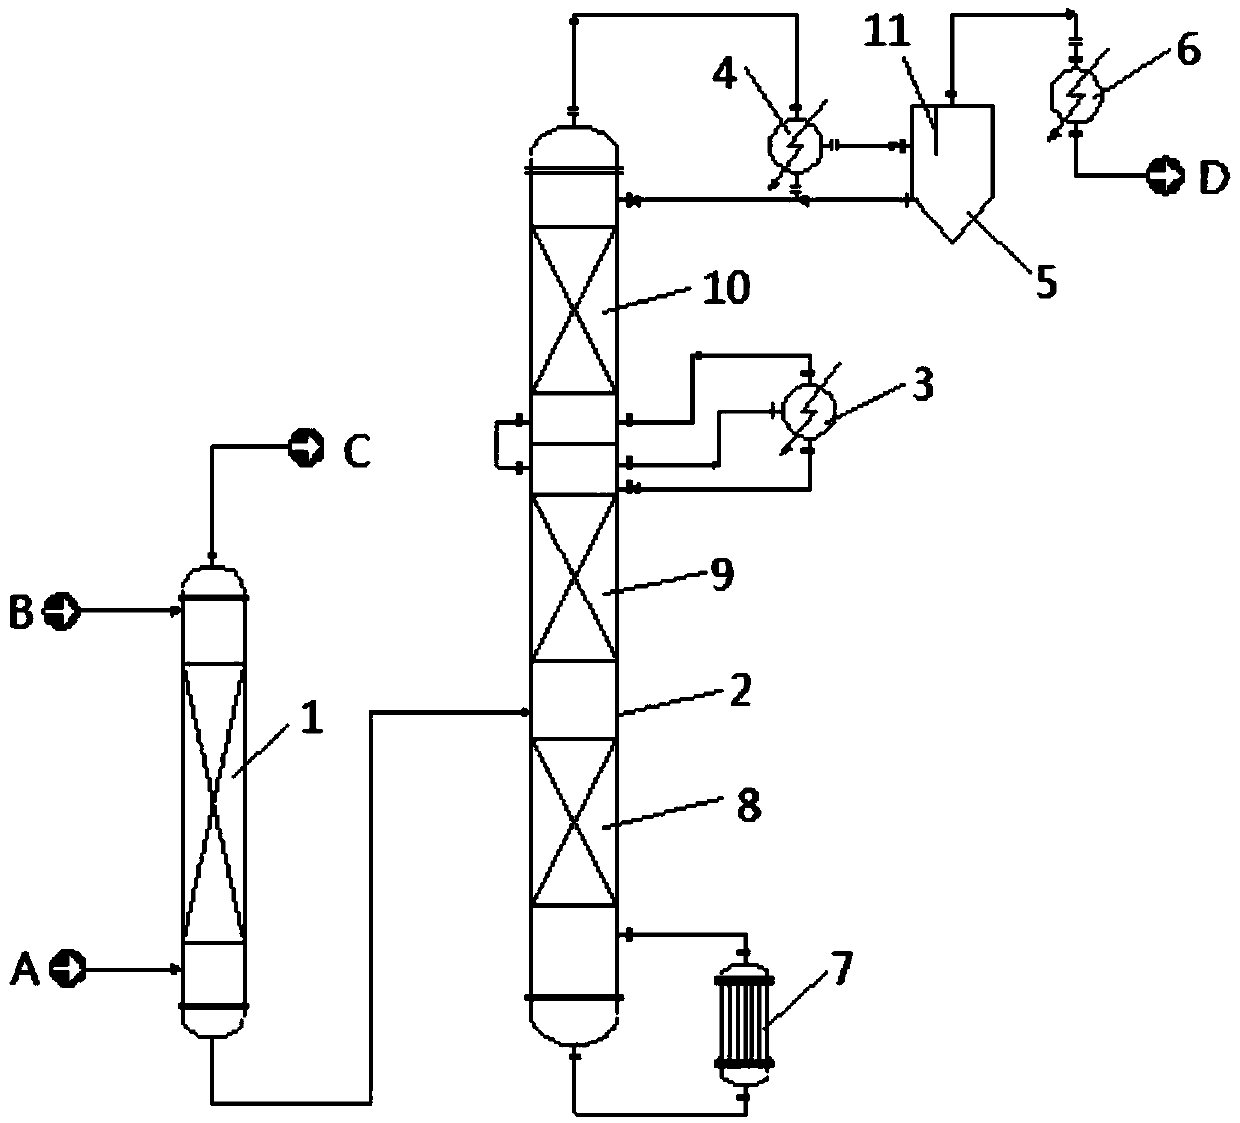 Process and system for preparing high-purity liquid hydrogen cyanide